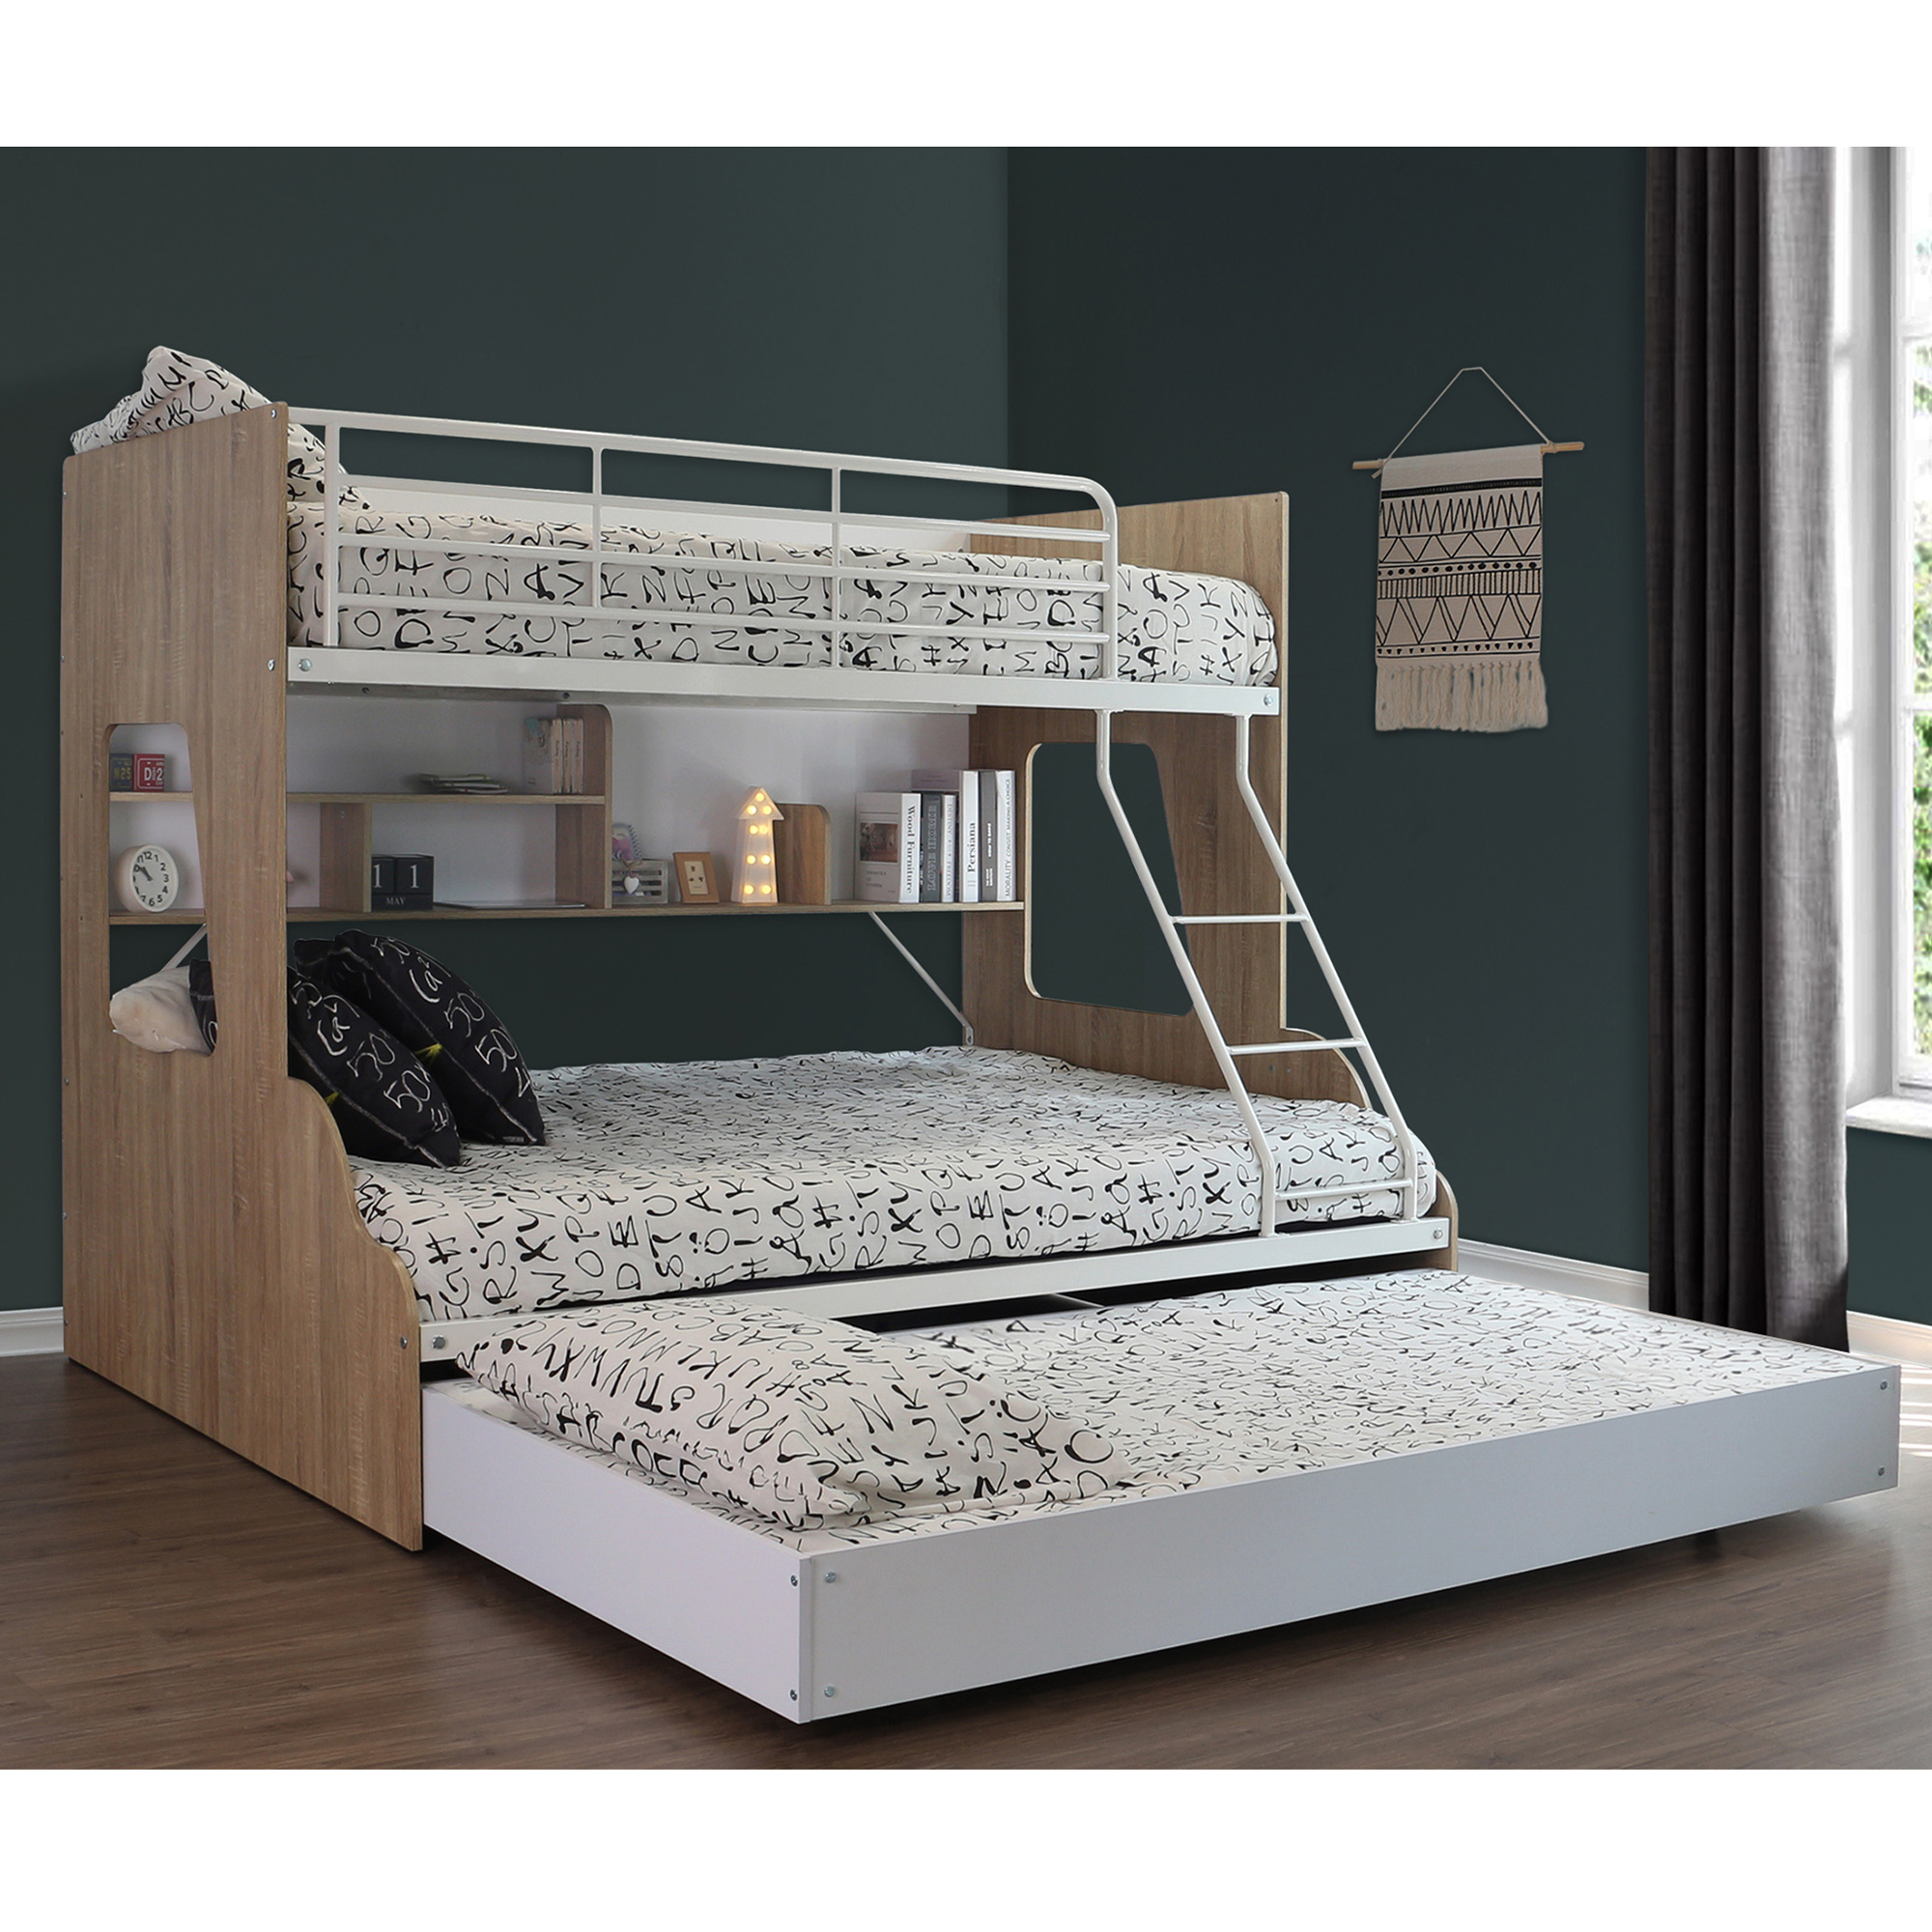 Single Over Double Trio Bunk Bed, Bunk Beds Double On Bottom Single On Top